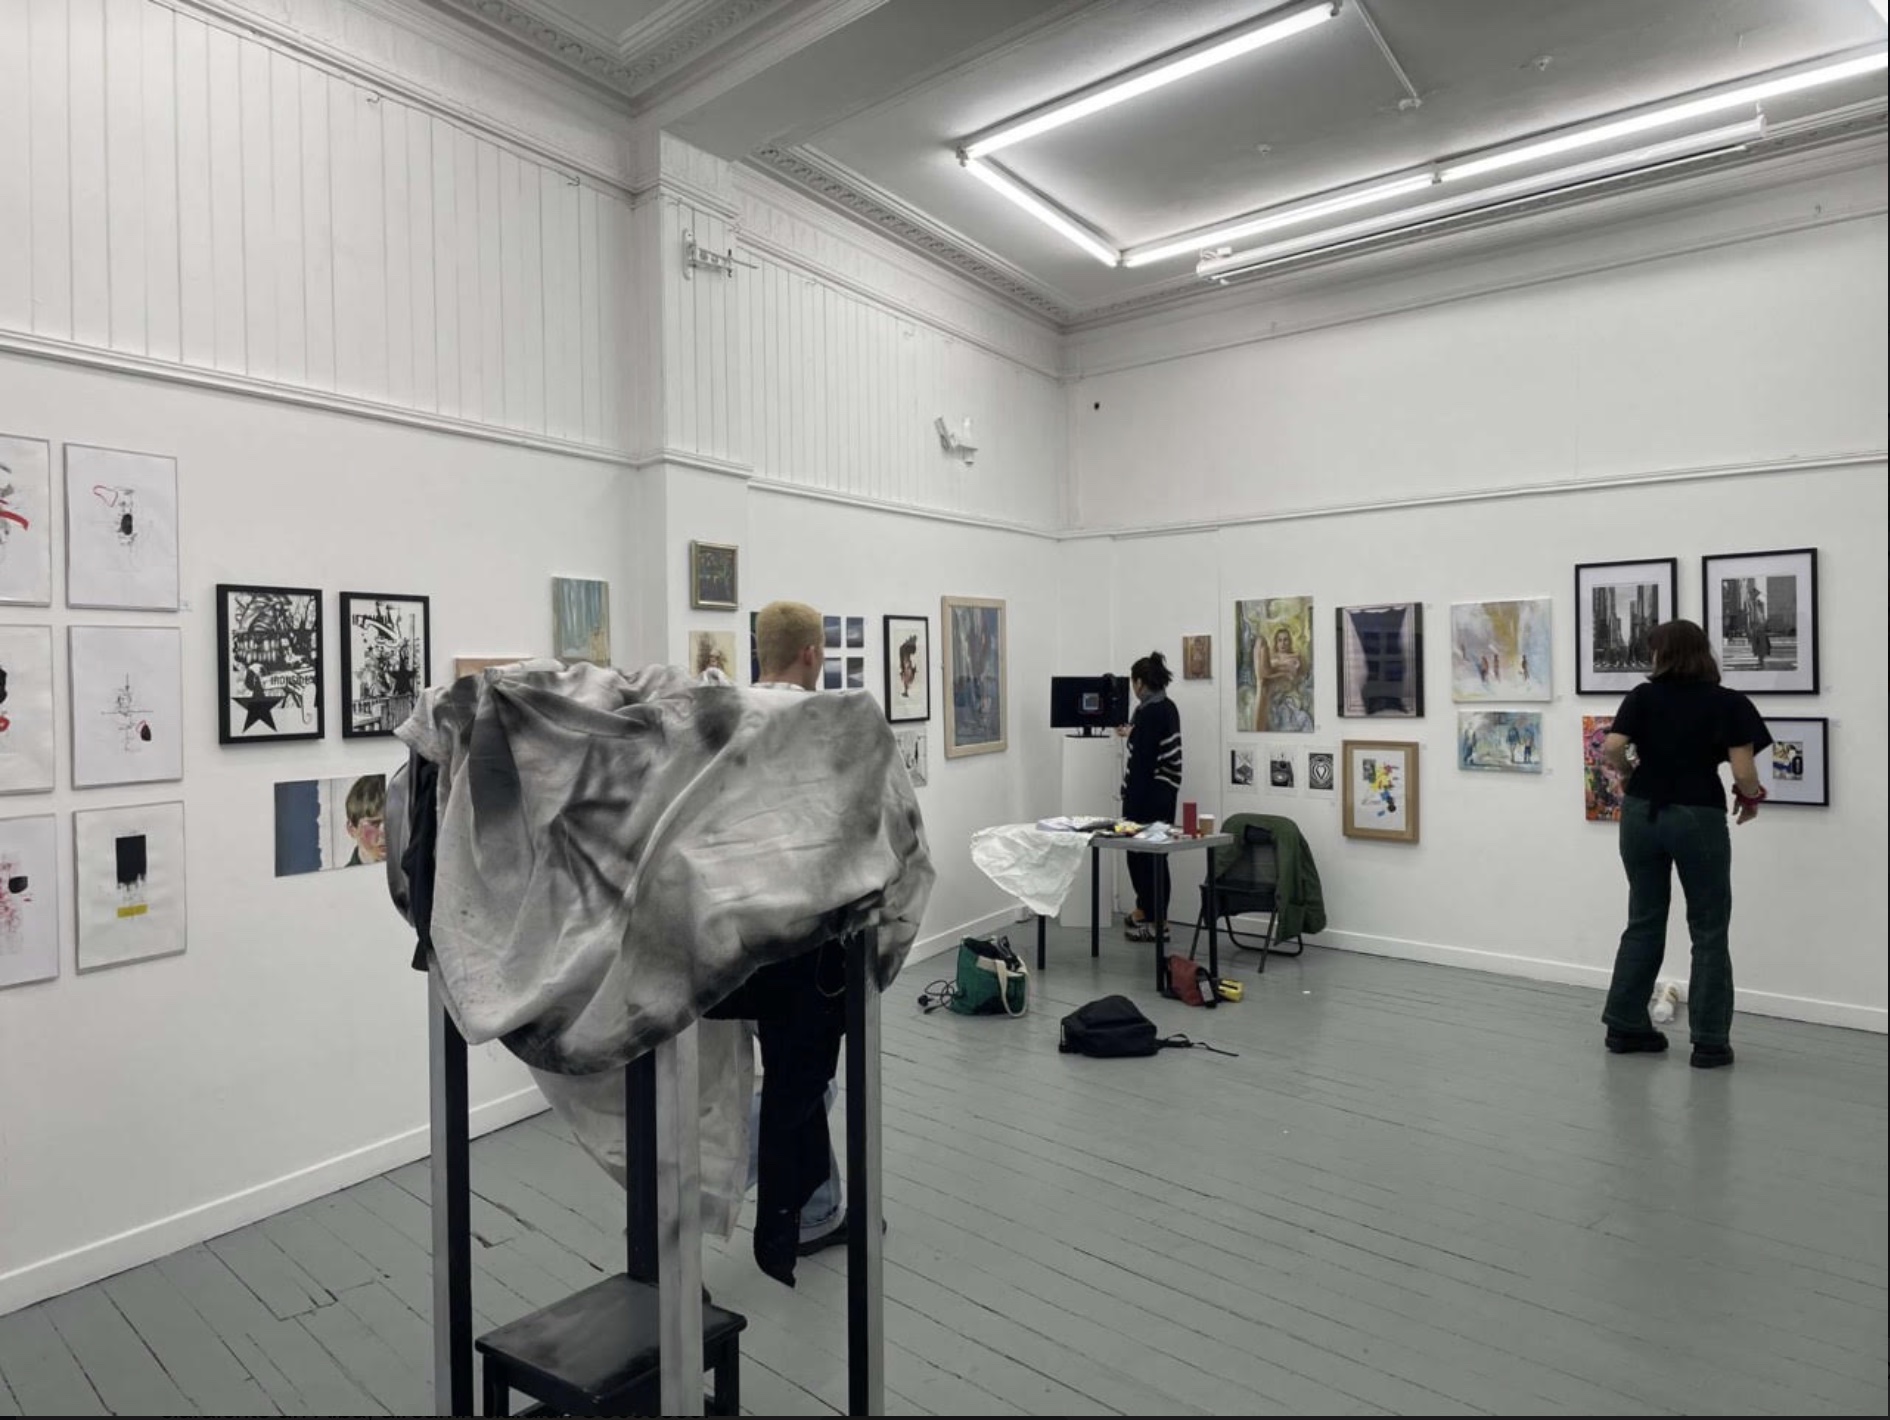 Studio space displaying the works of the Young Edinburgh Artists Exhibition. People walk through the space